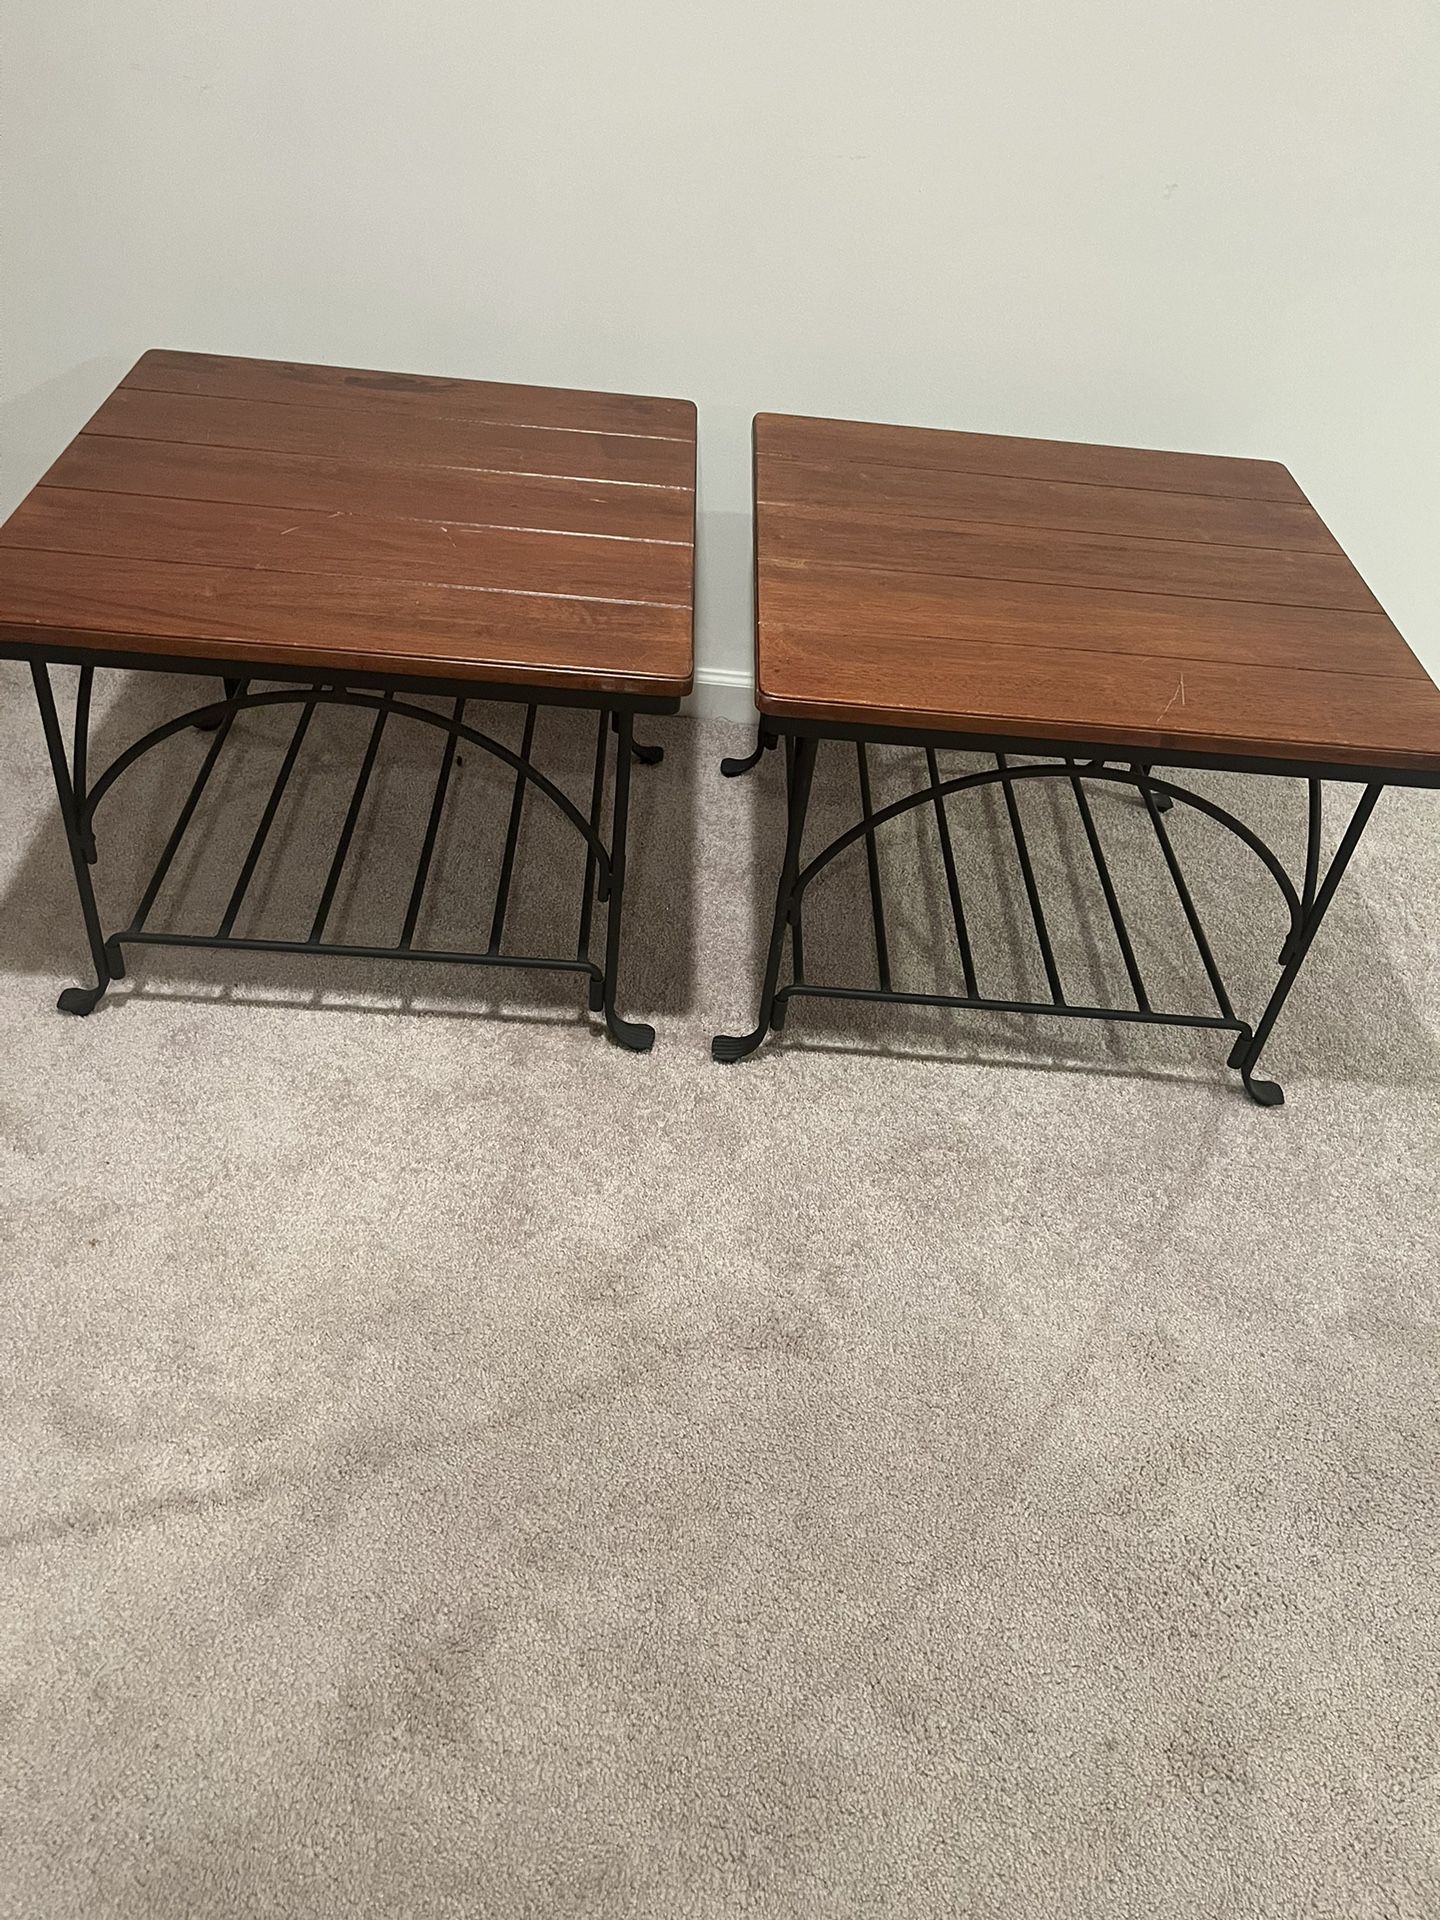 Two Coffee Tables Sold Wood For Sale Each Price 25$ Size 26x26